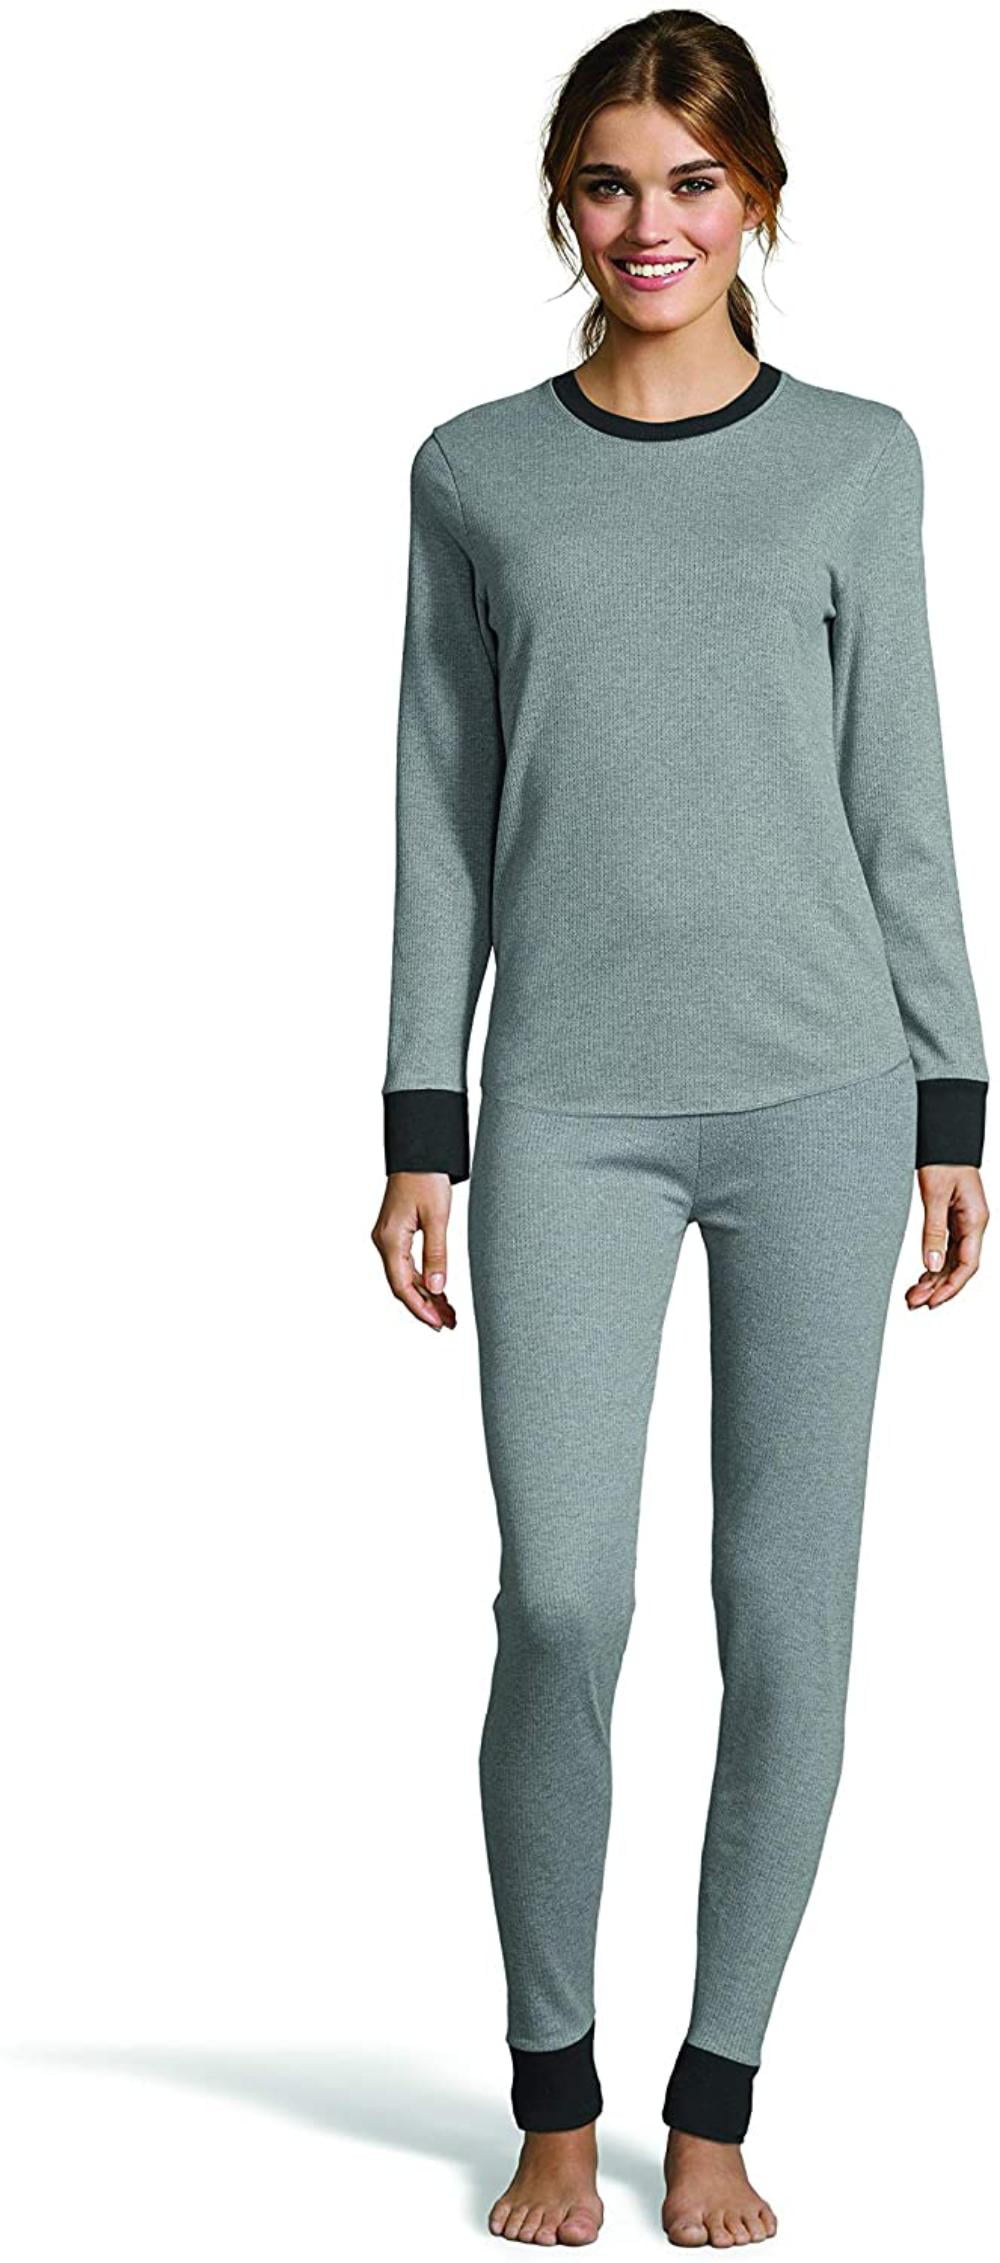 Hanes Womens Color Fusion 2-Ply Crew Neck Thermal Baselayer Tagless Long Sleeve T-Shirt 